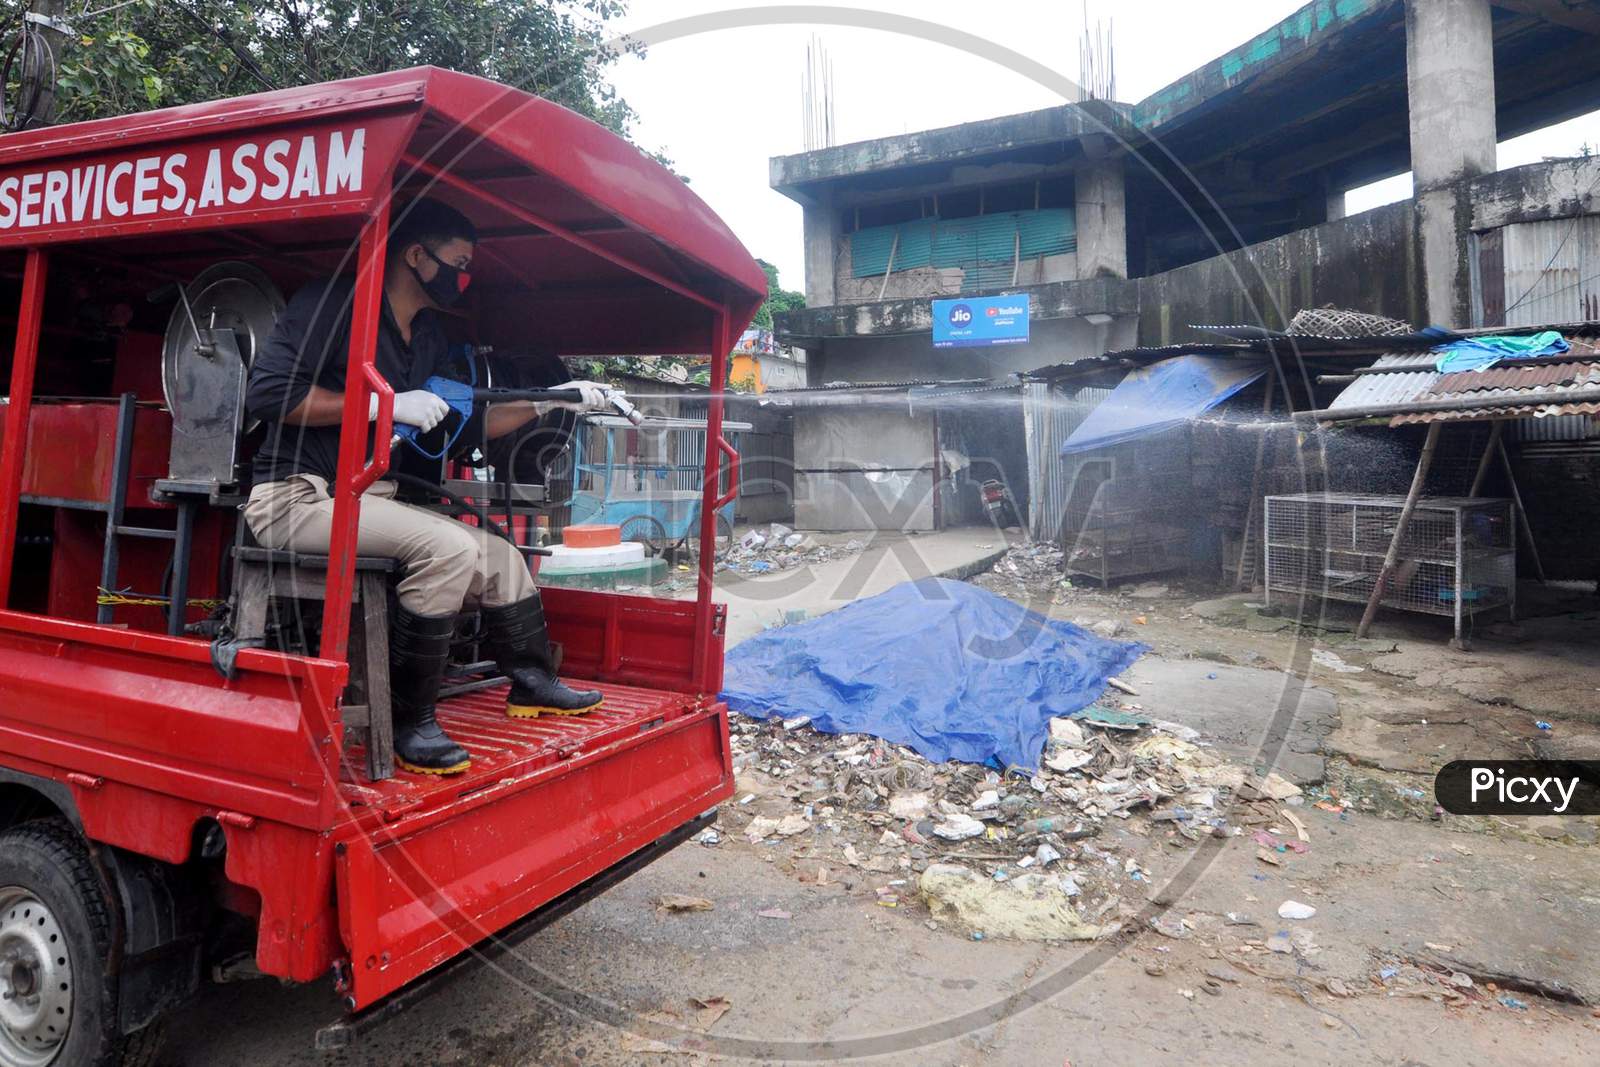 A firefighter sprays disinfectant in a market area during a lockdown in Guwahati, Assam on July 02, 2020.